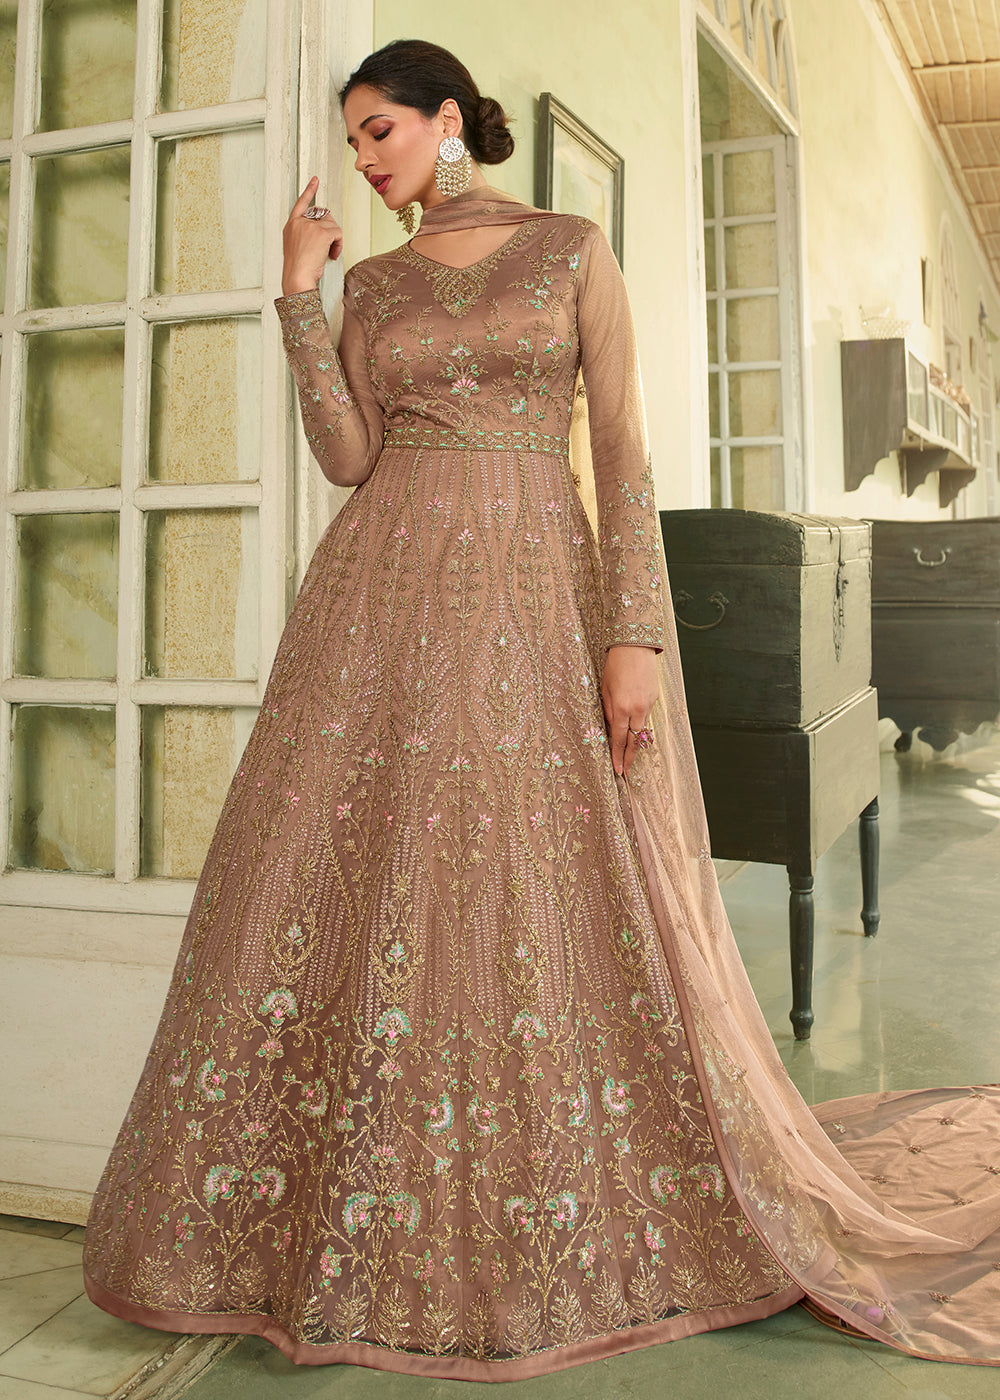 Buy Now Slit Style Captivating Peach Zari Embroidered Party Festive Anarkali Suit Online in USA, UK, Australia, New Zealand, Canada & Worldwide at Empress Clothing. 